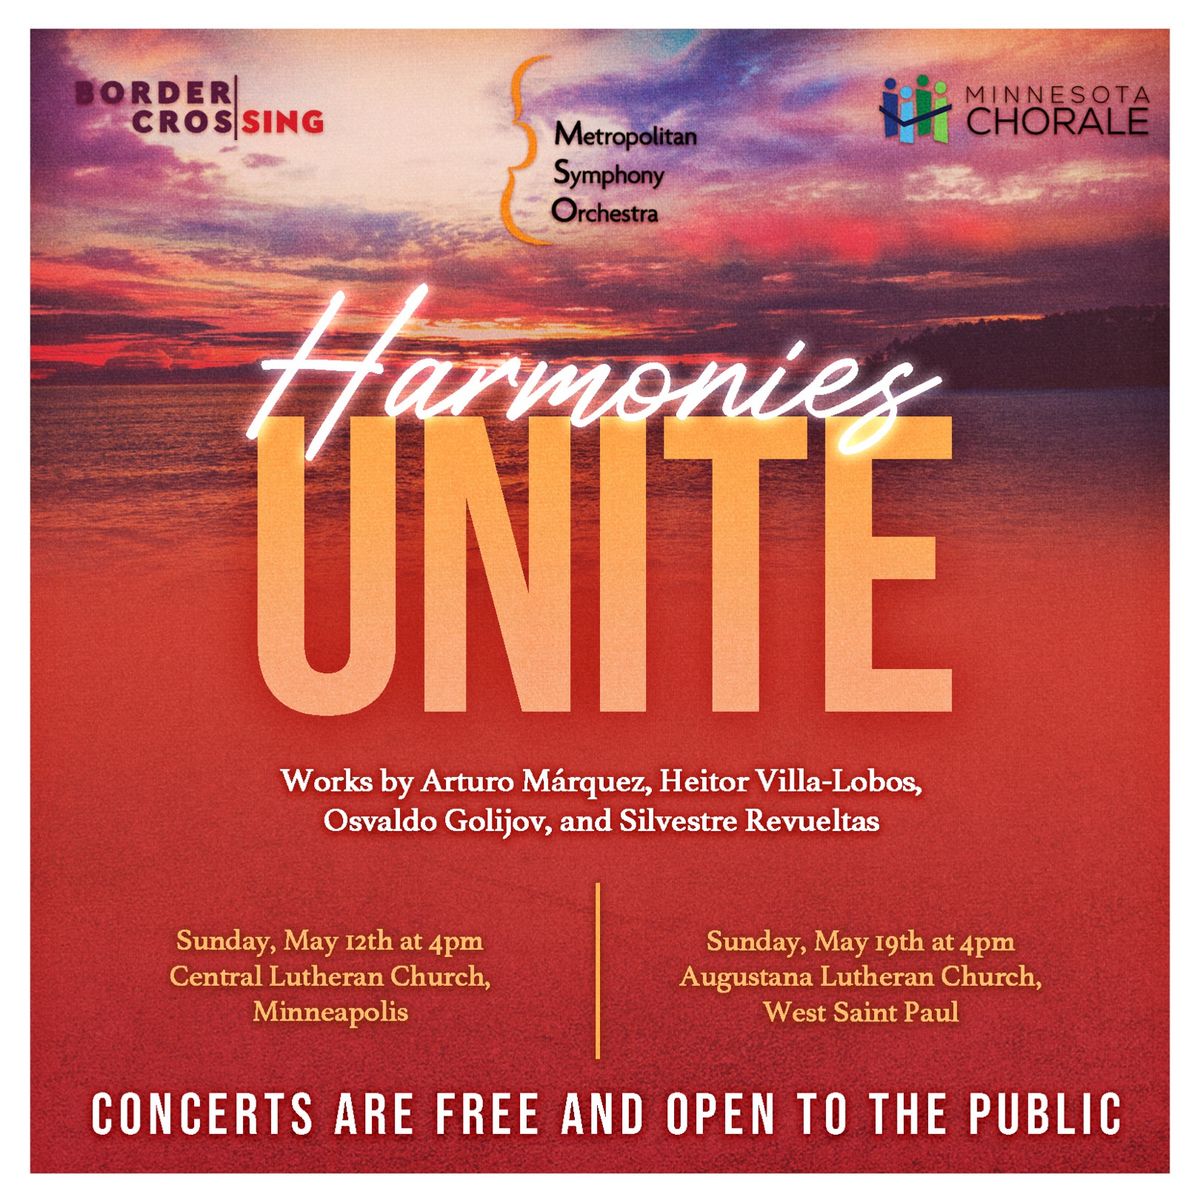 Free Concert: Harmonies Unite with the MSO & Border CrosSing